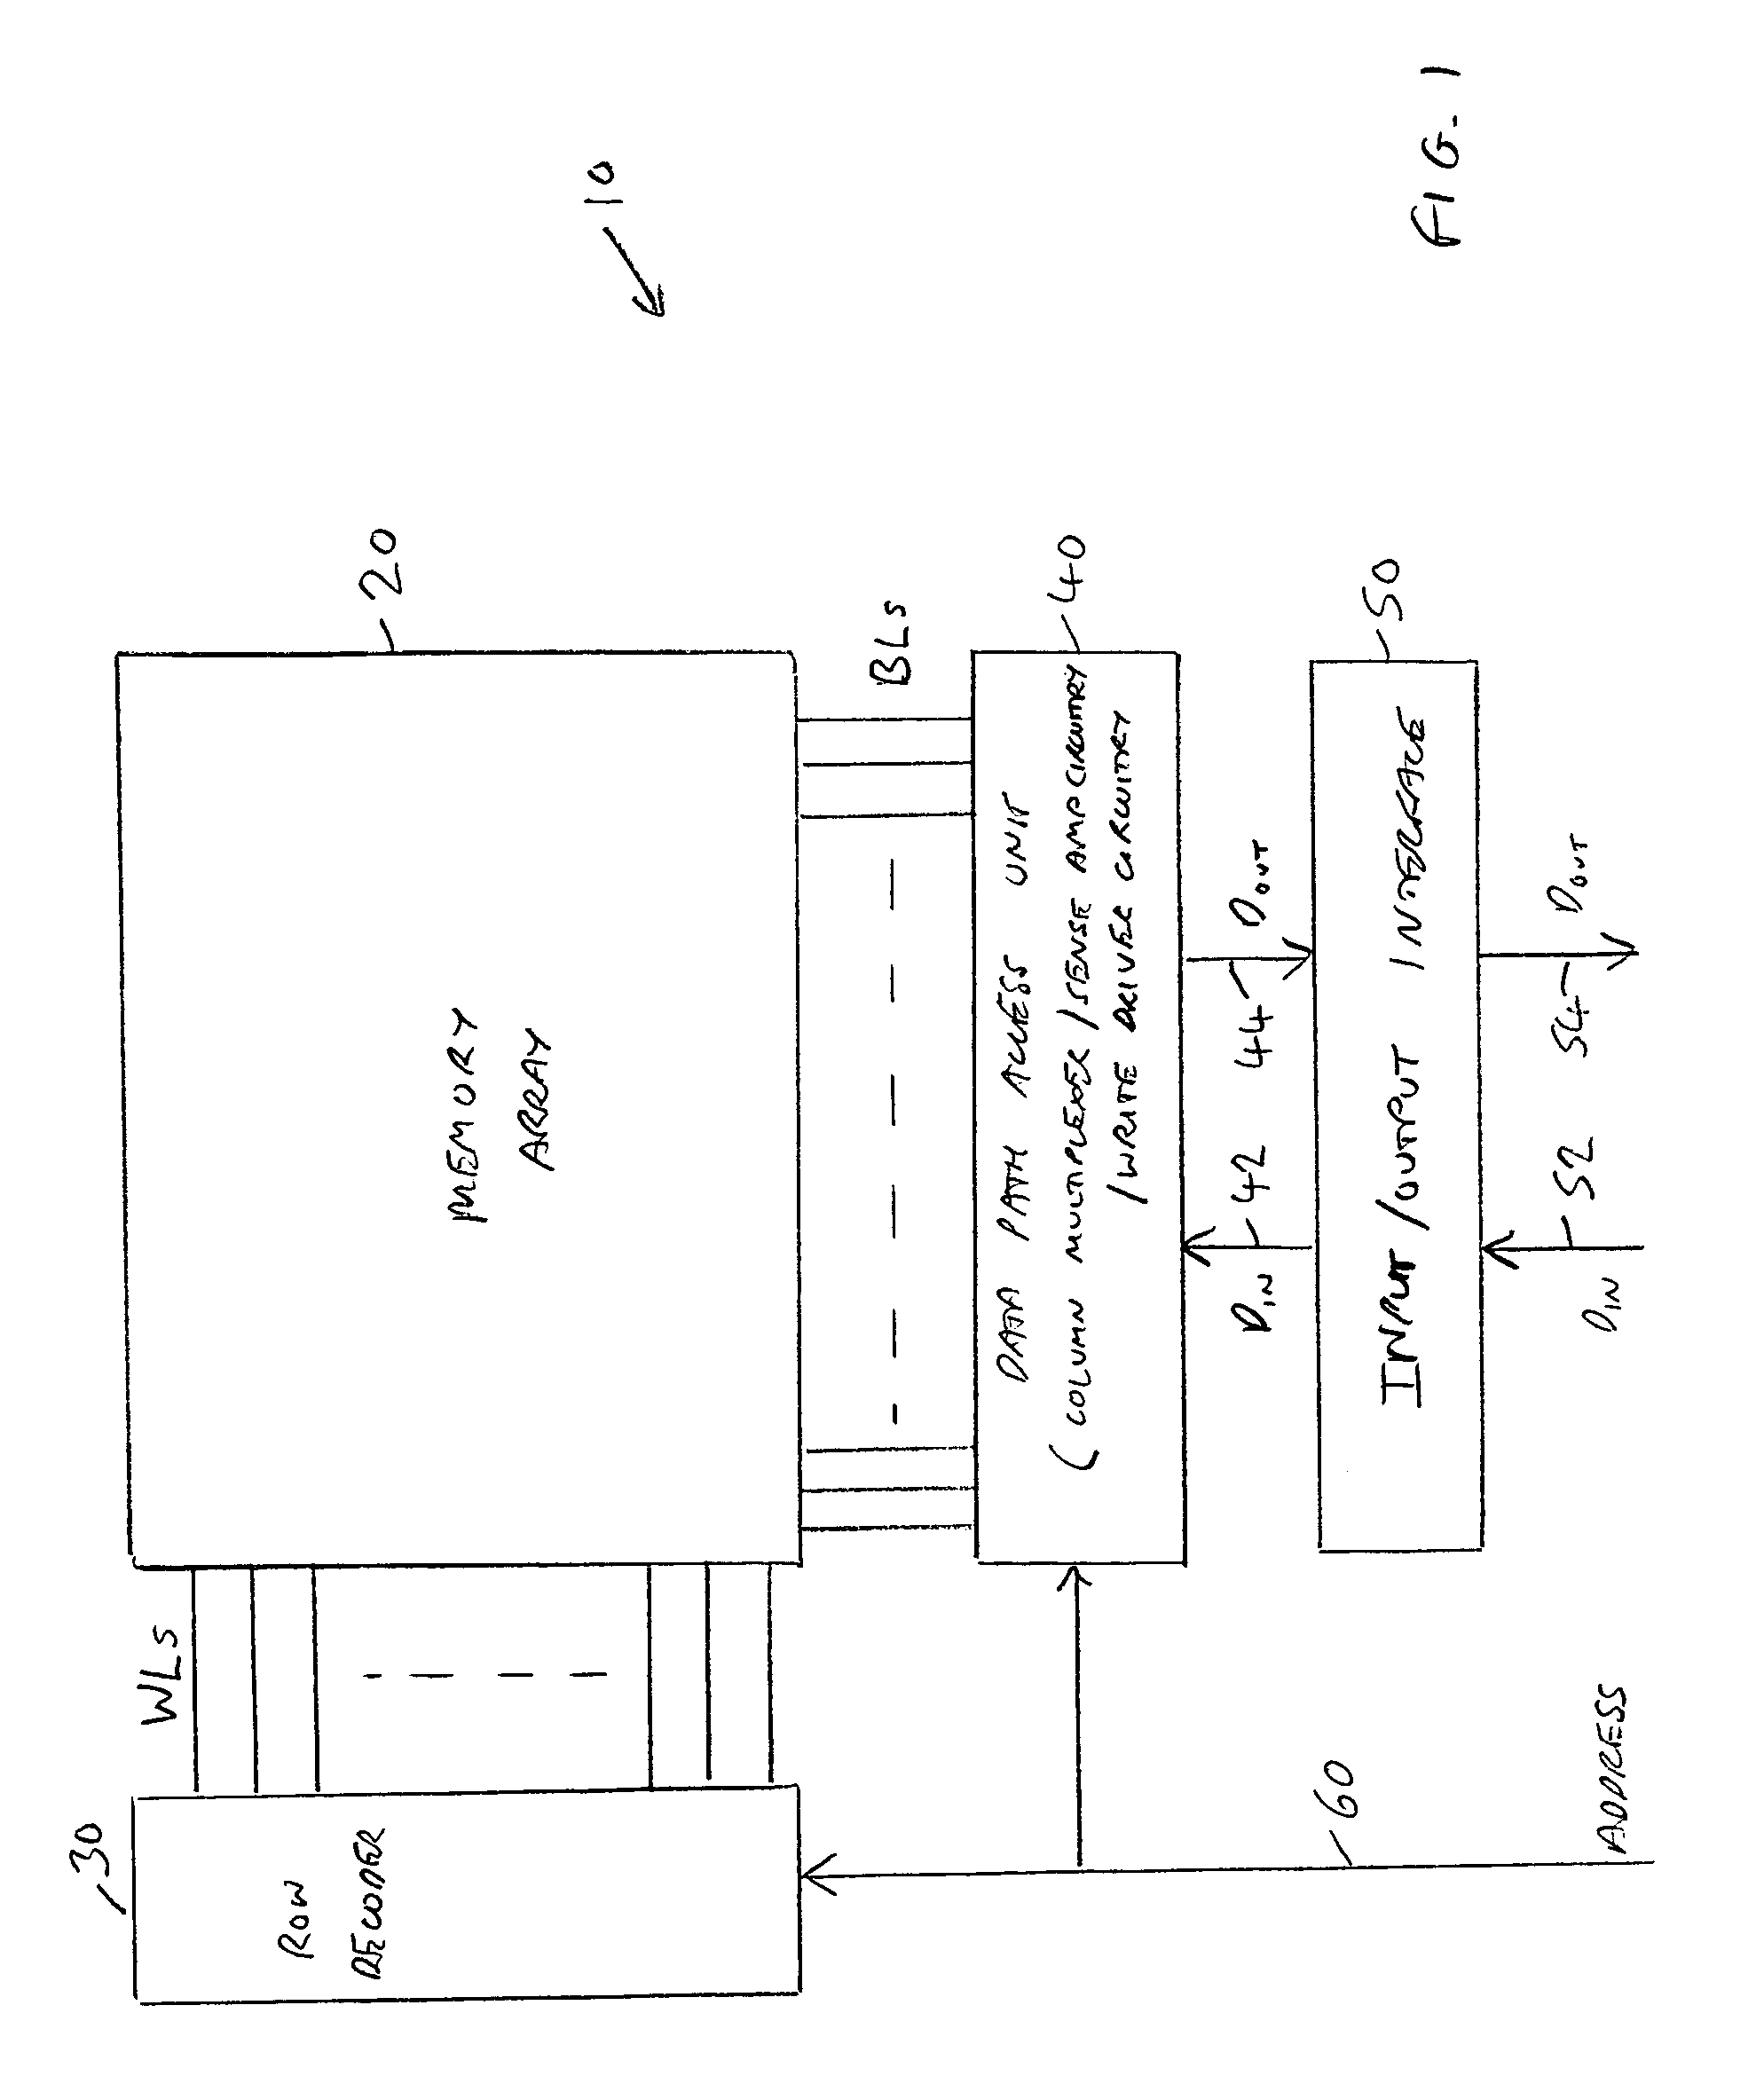 Memory device and method for performing write operations in such a memory device